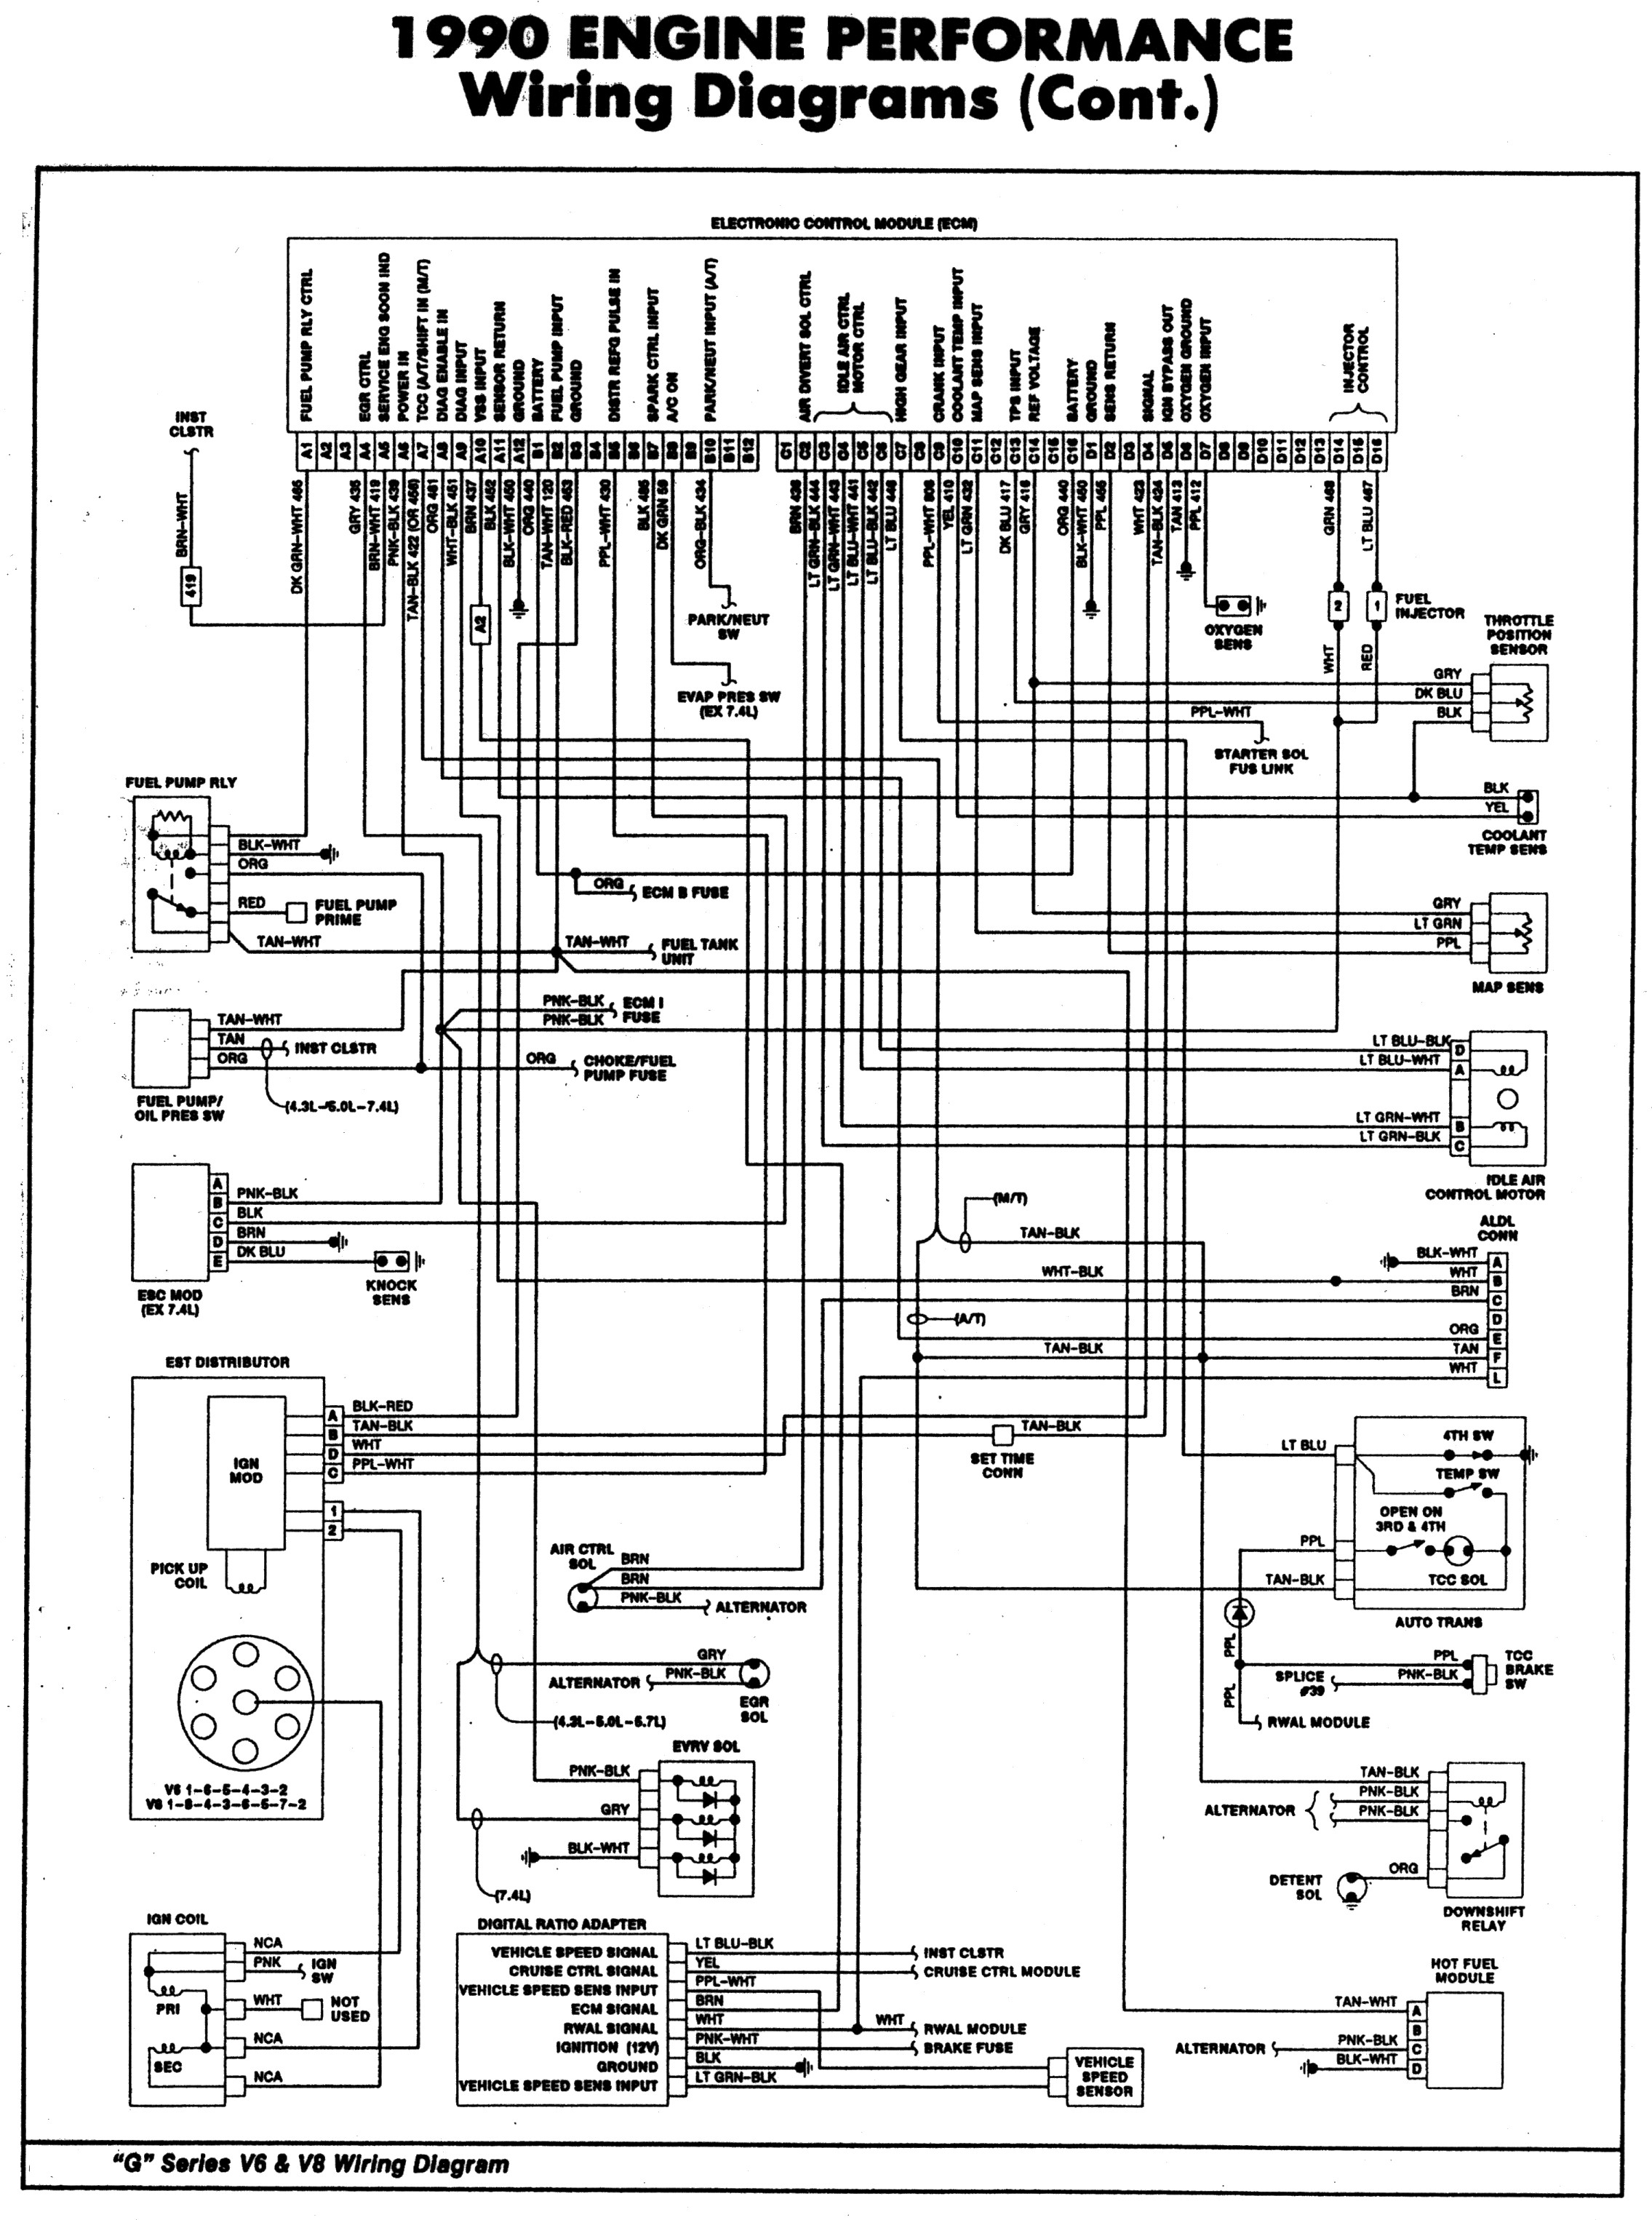 Chevy S10 Engine Diagram Chevy Tbi Wiring Install Wiring Info • Of Chevy S10 Engine Diagram